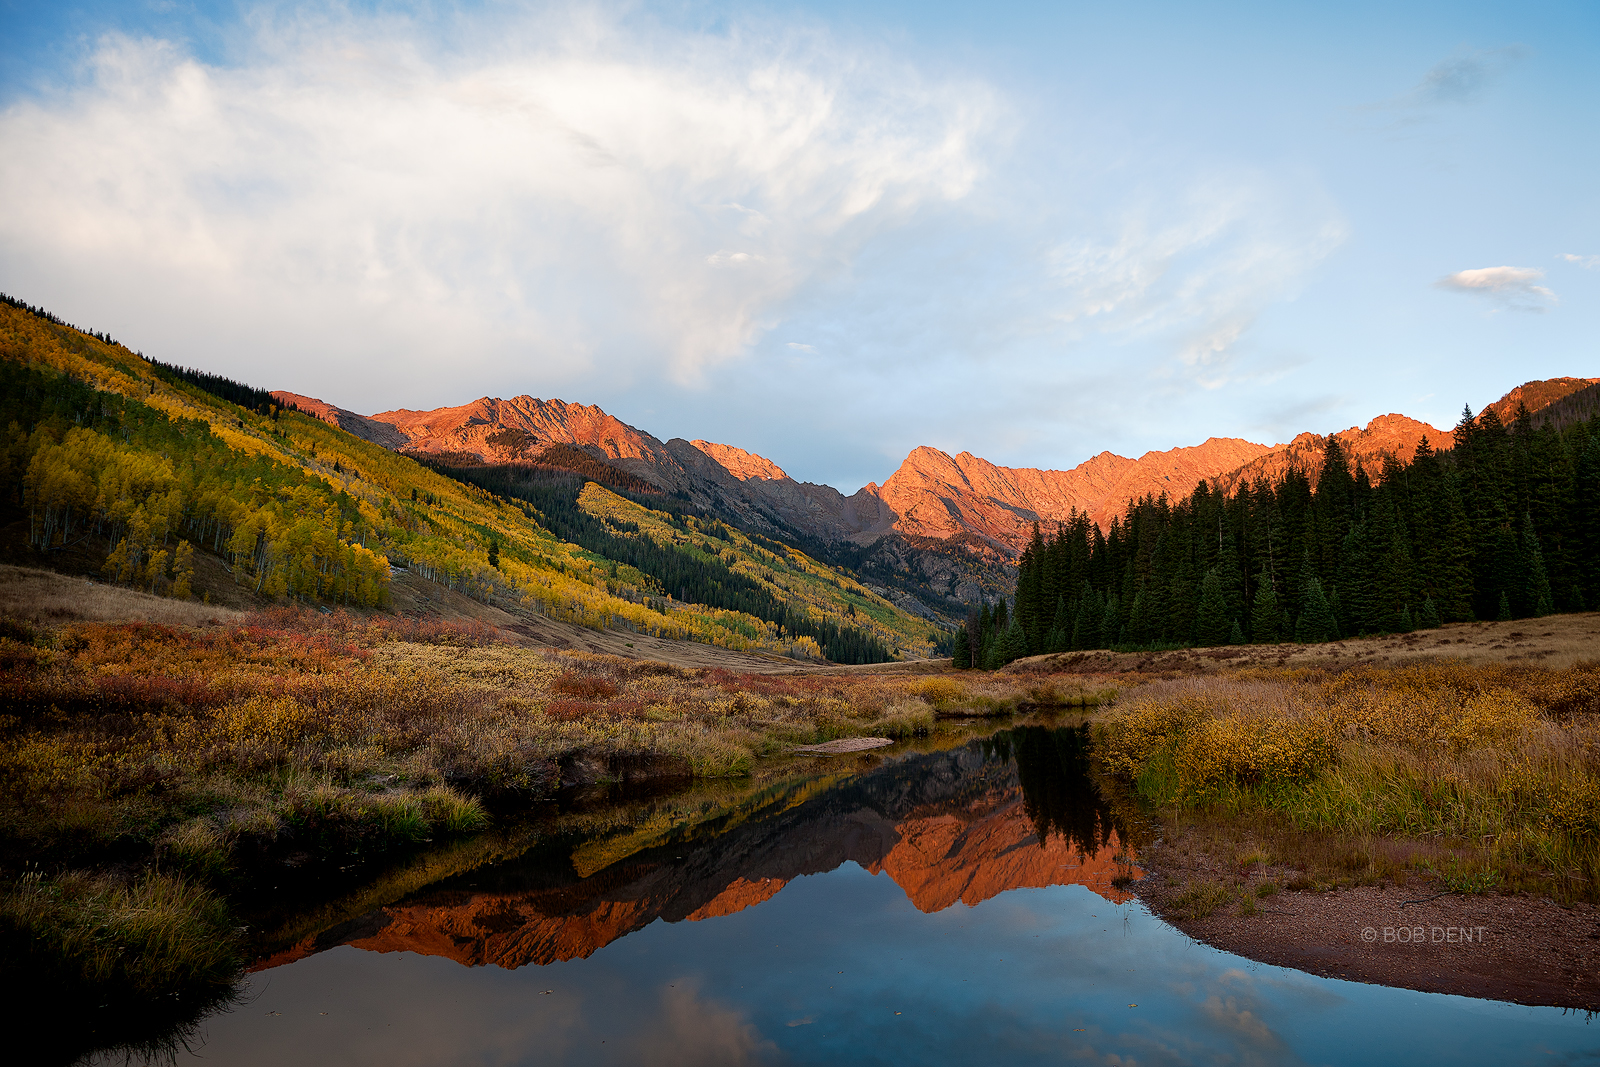 Alpenglow lights up the Gore Range above Piney River, White River National Forest, Colorado.